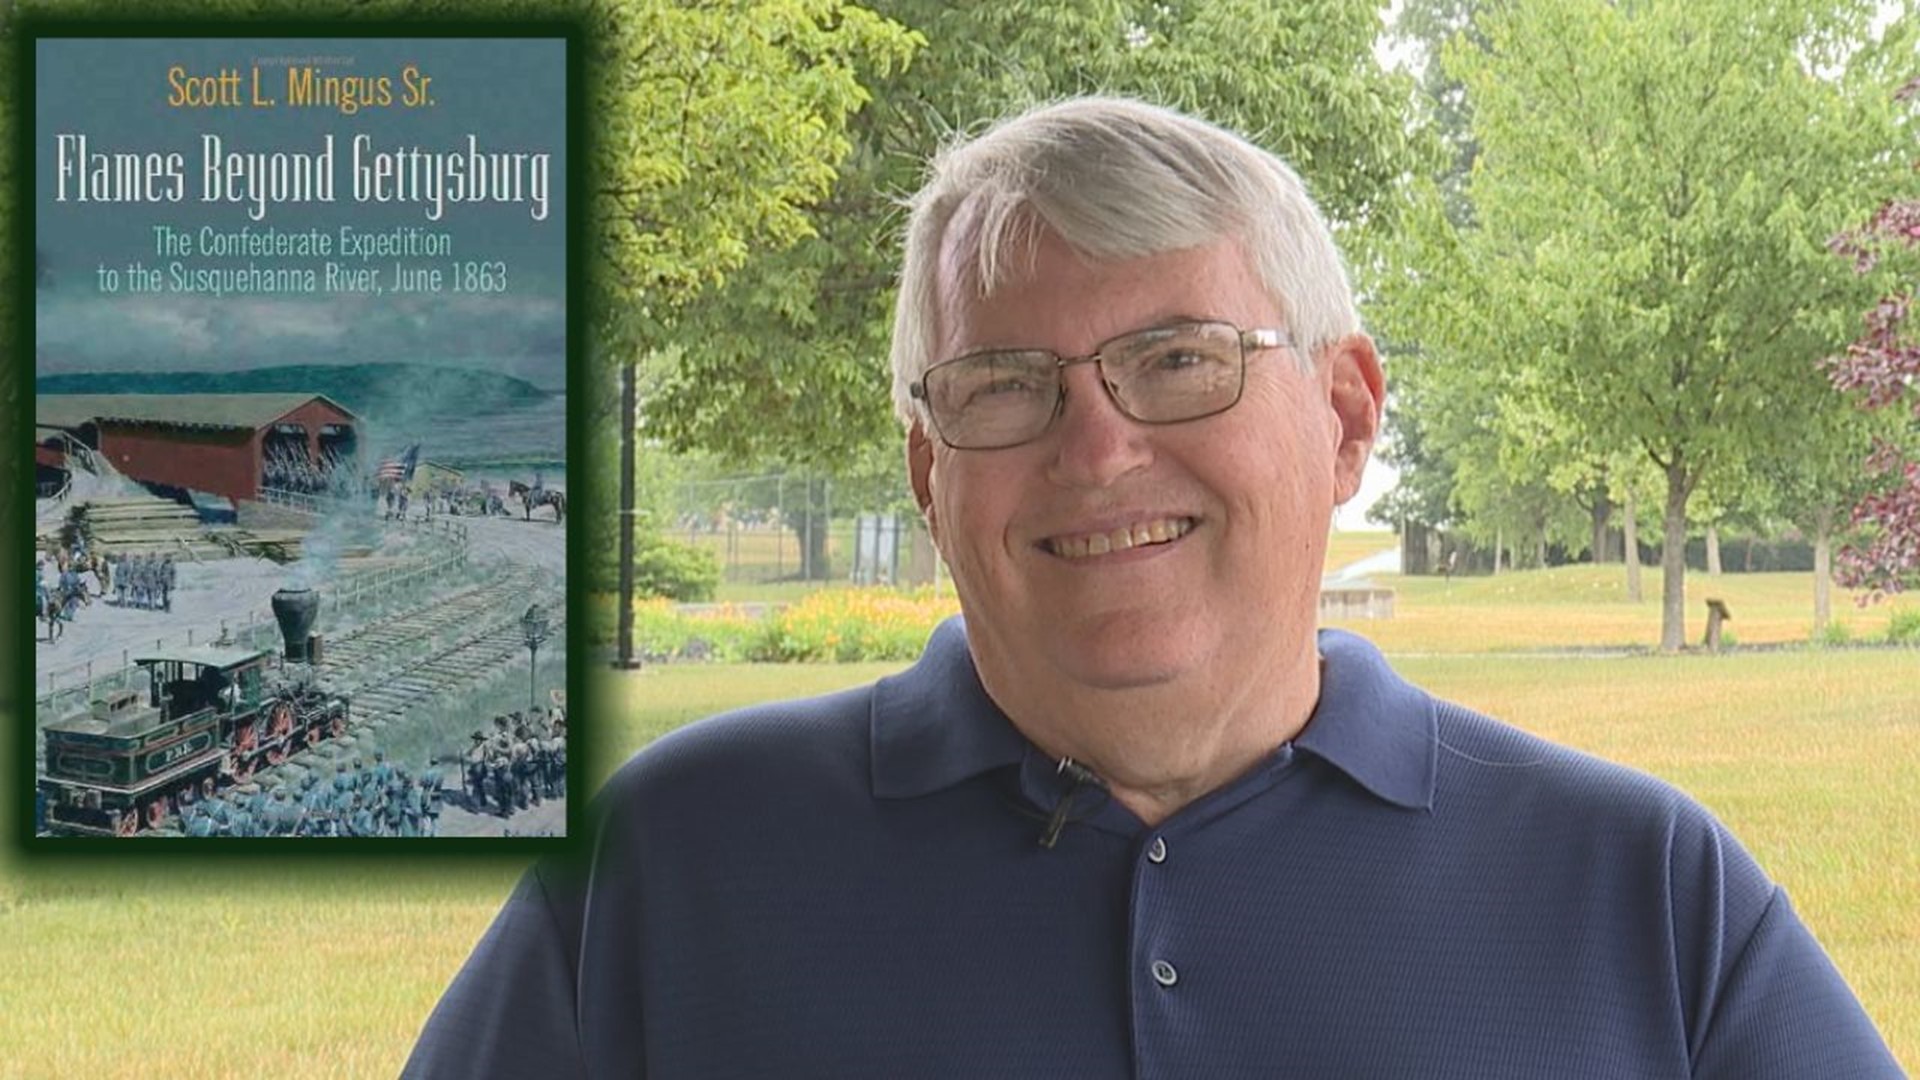 Scott Mingus, the author of 'Flames Beyond Gettysburg: The Confederate Expedition to the Susquehanna River, June 1863' breaks down the events of the historic event.